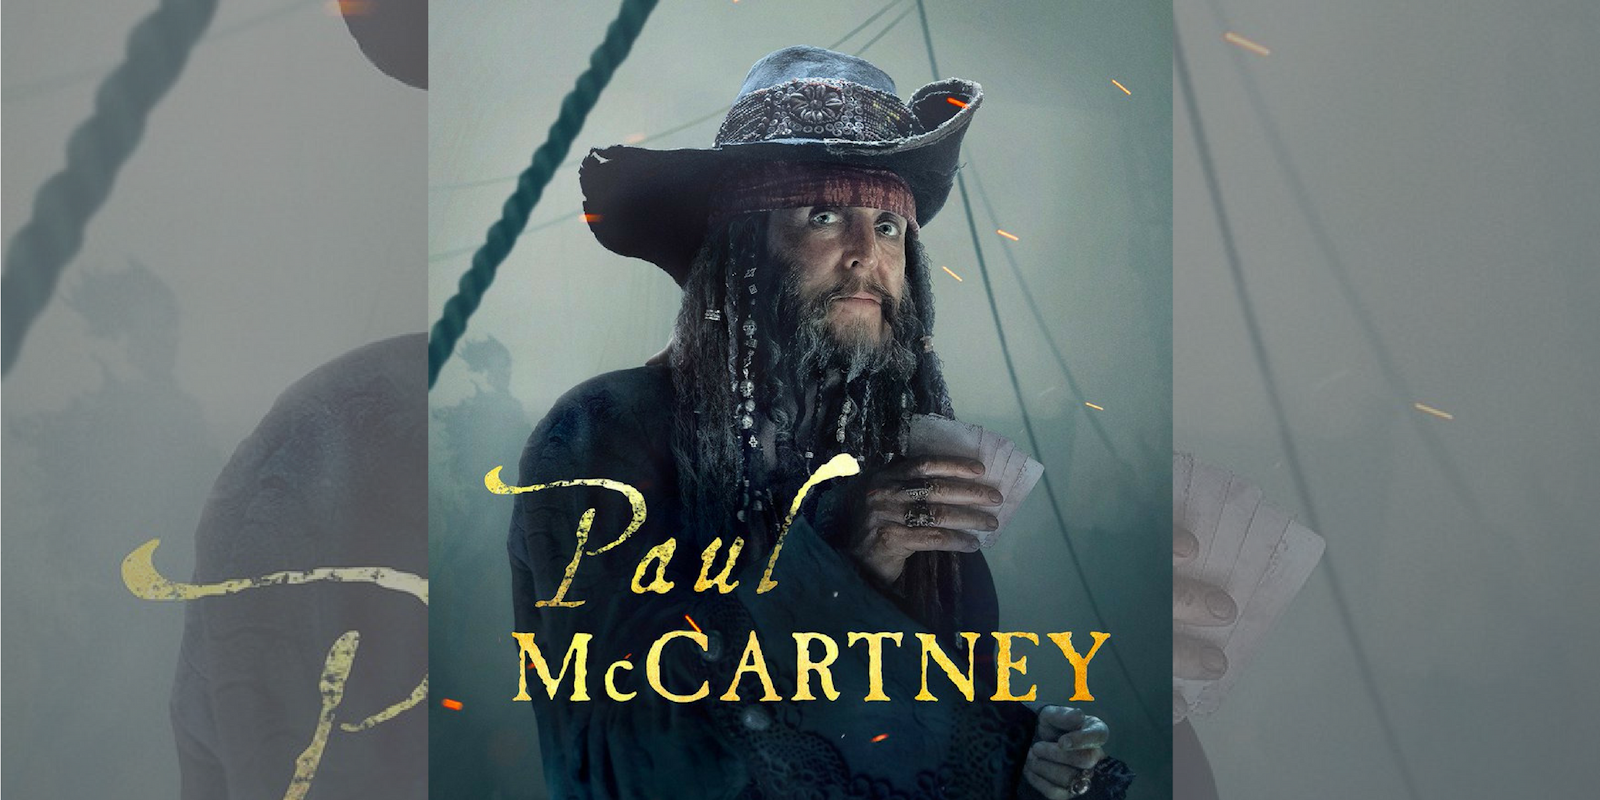 Paul McCartney for Pirates of the Caribbean